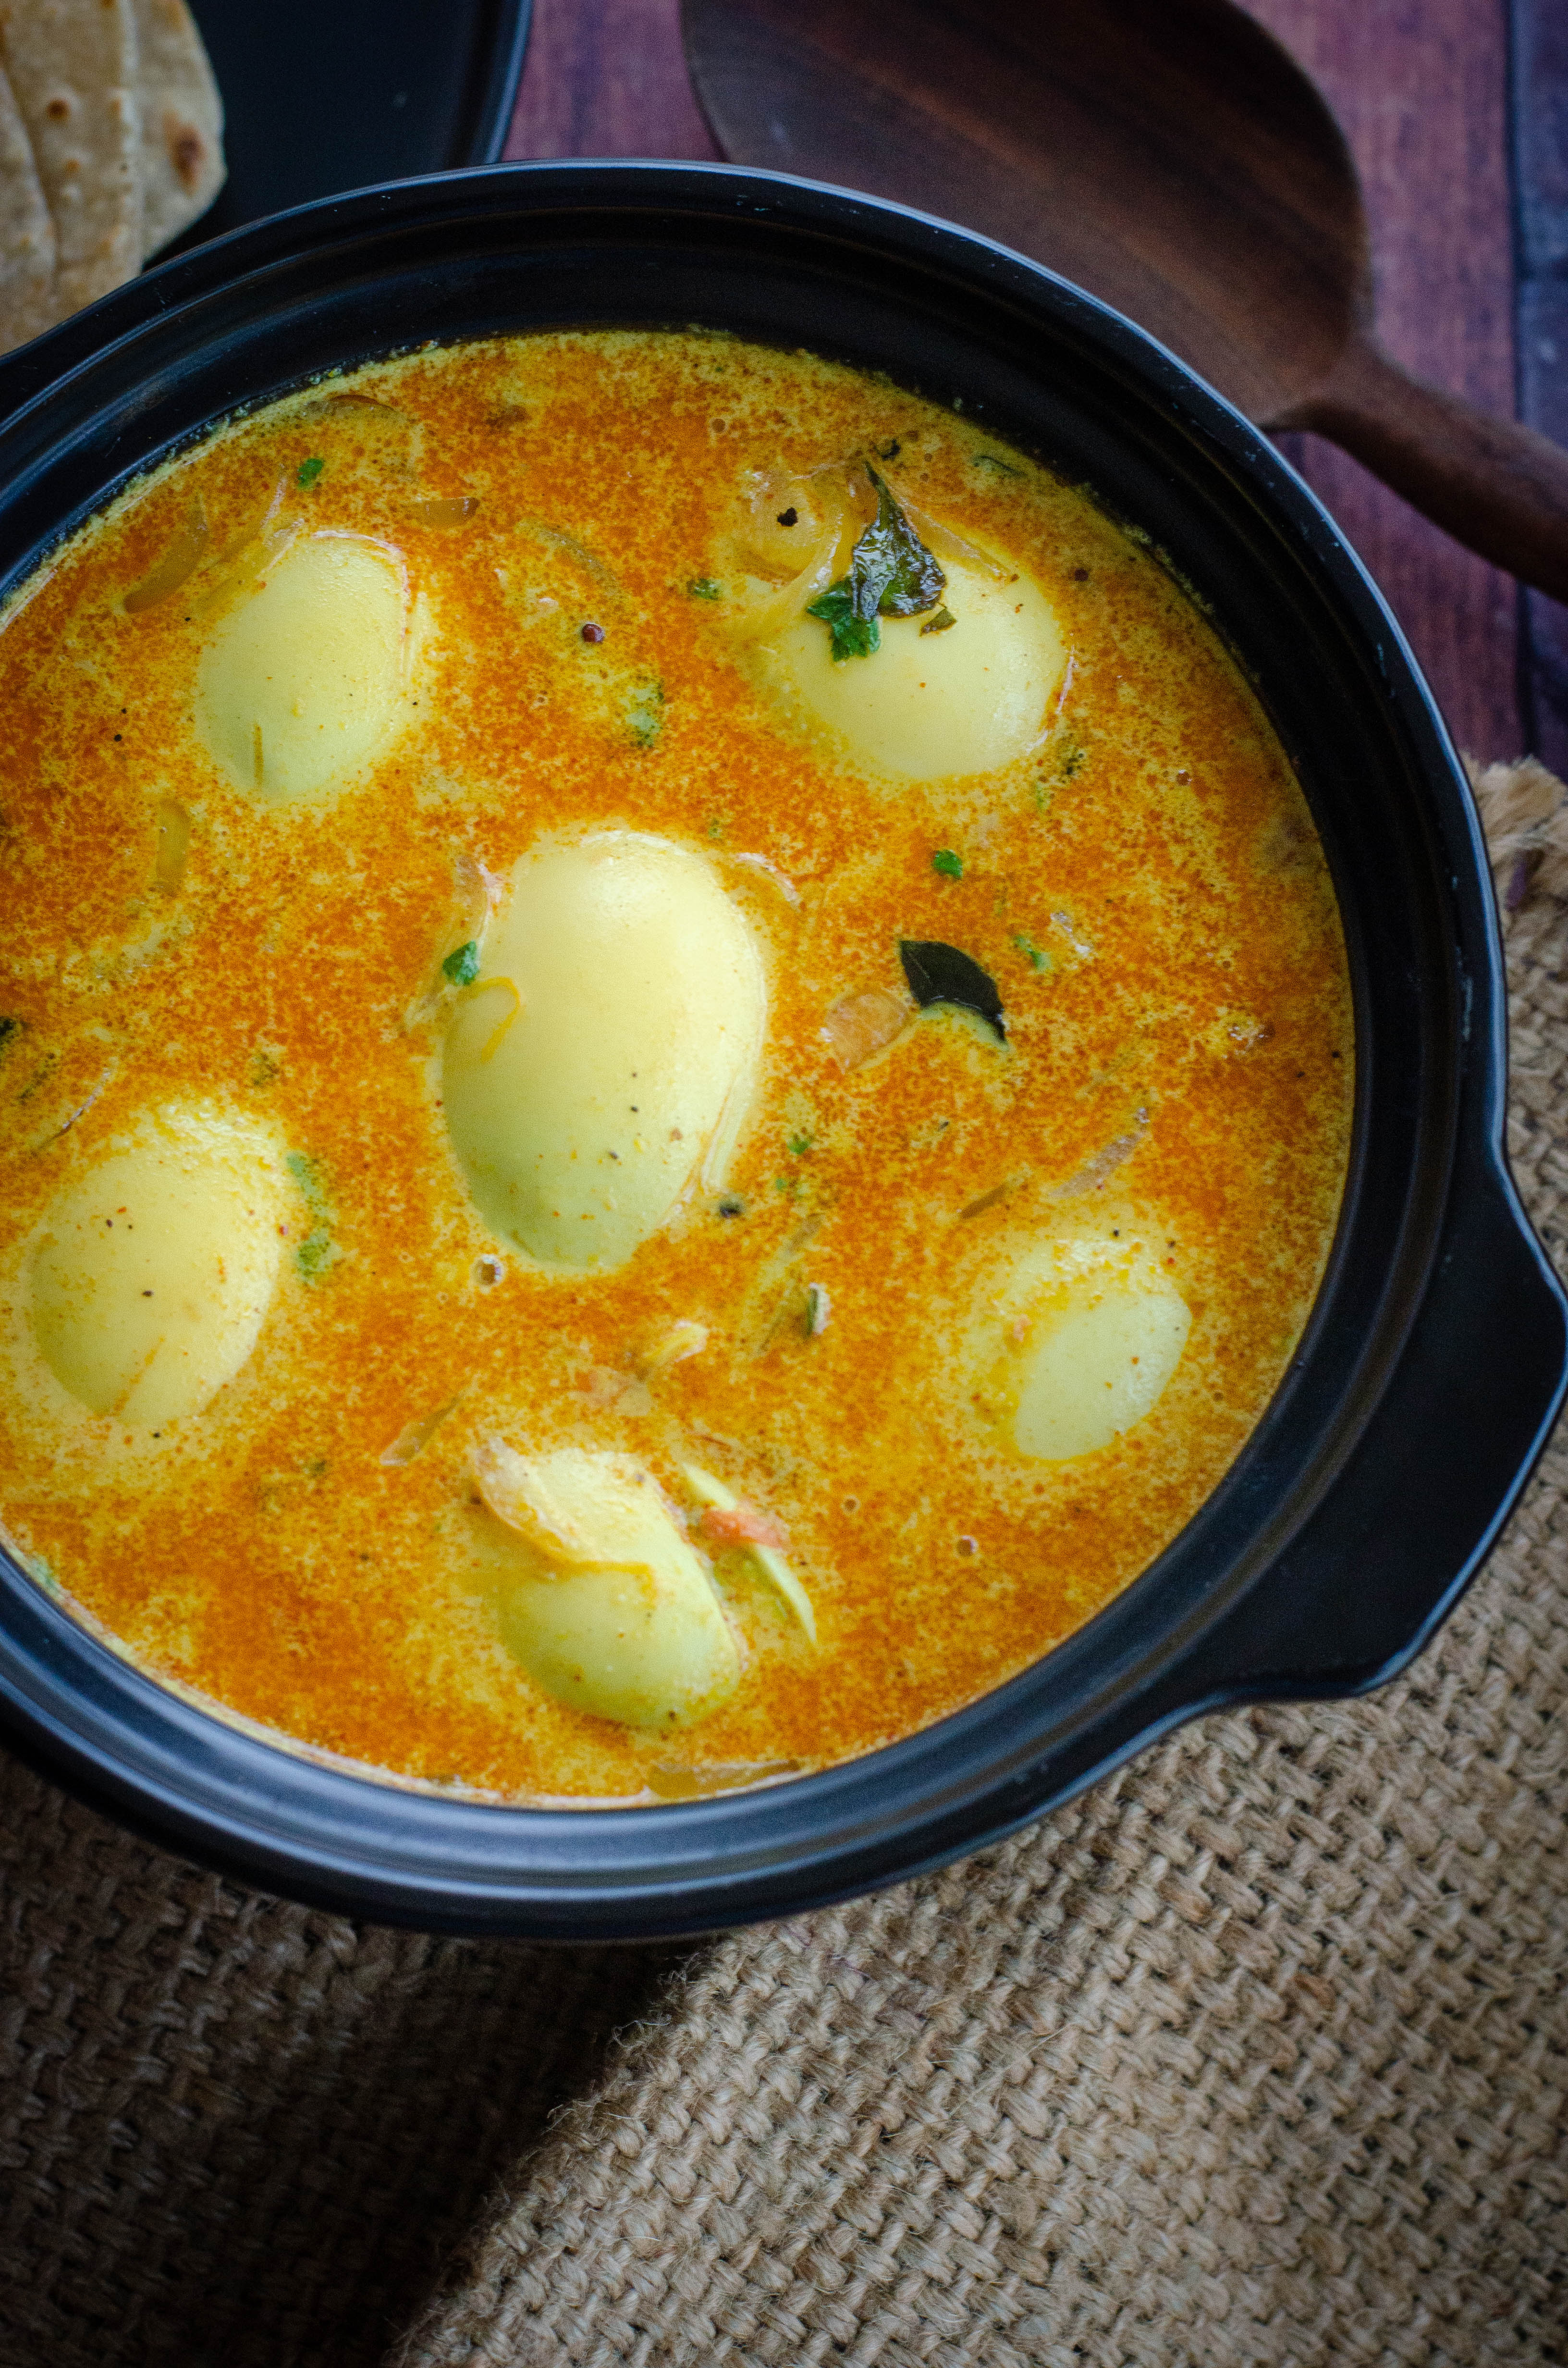 kerala egg curry served in a black bowl placed on a burlap mat